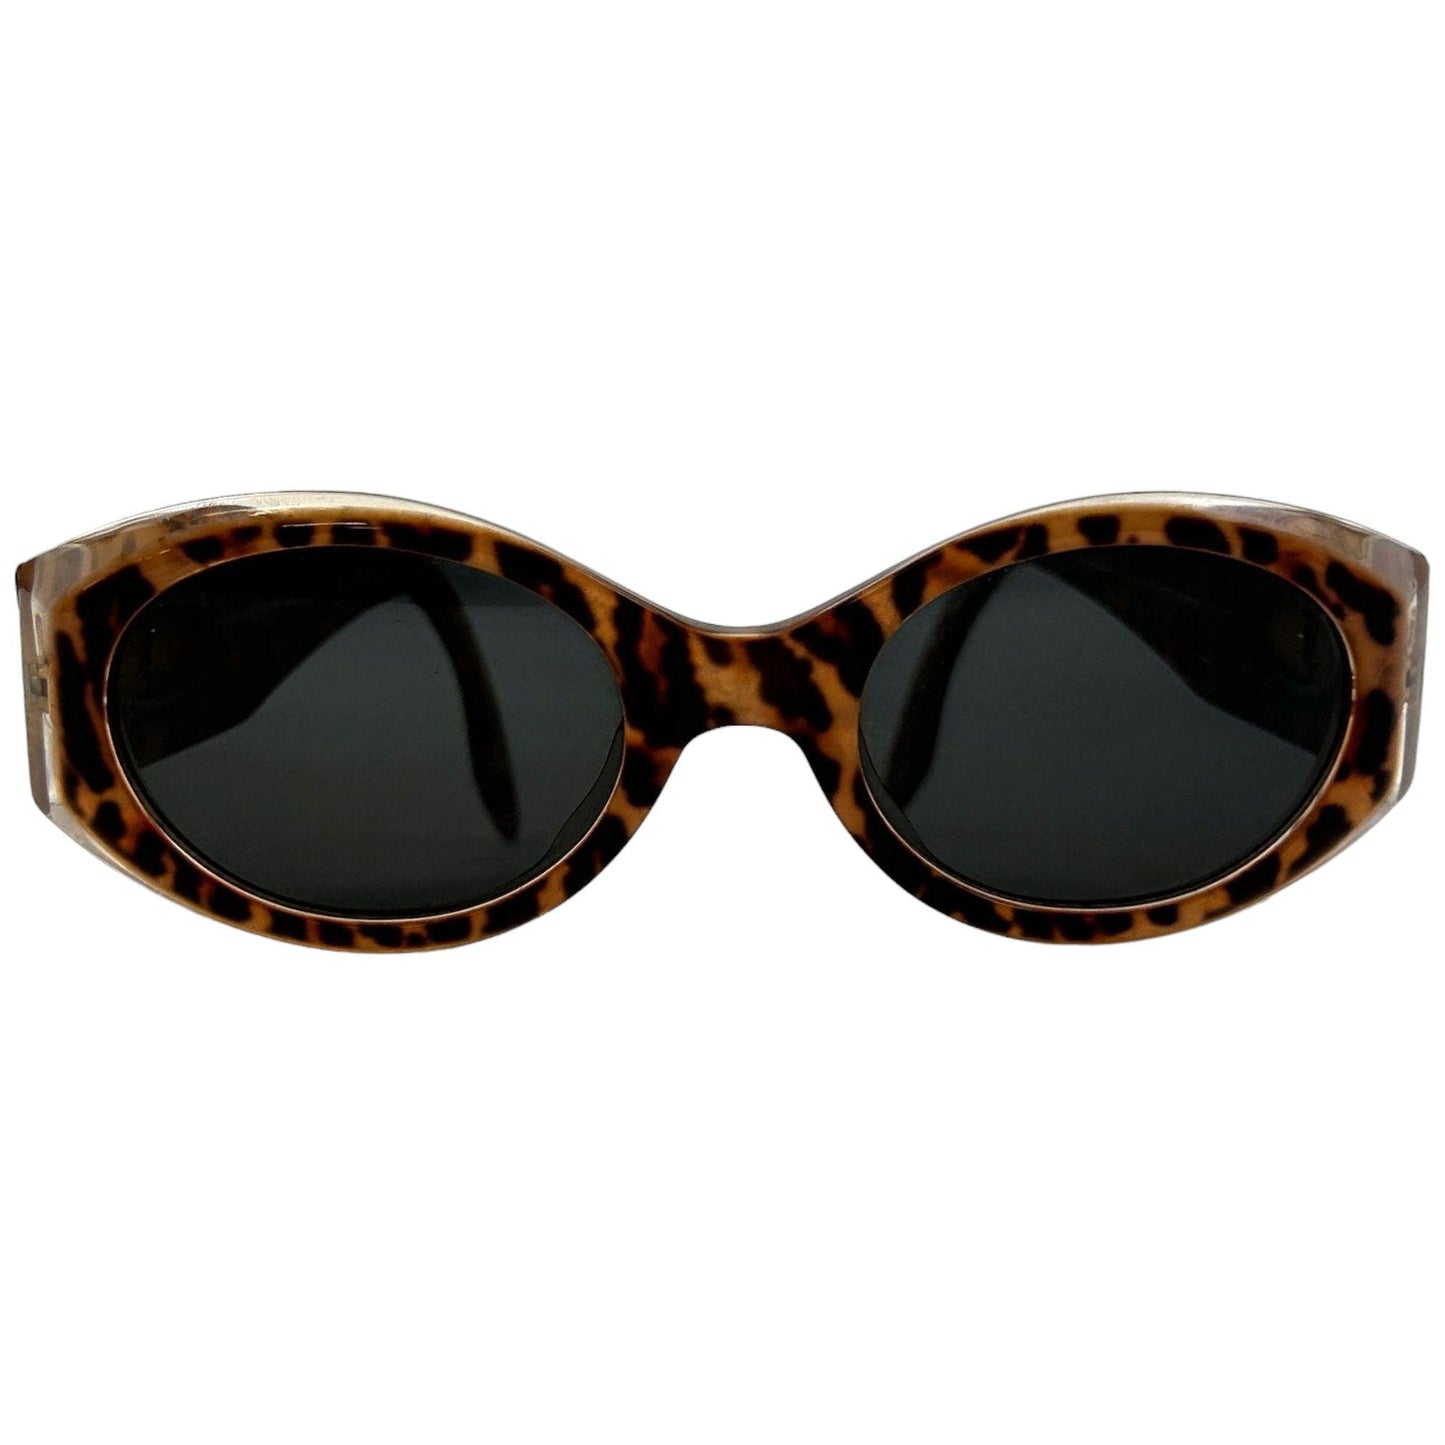 Vintage Yves Saint Laurent Tortoise Shell Sunglasses Size One Size - Known Source